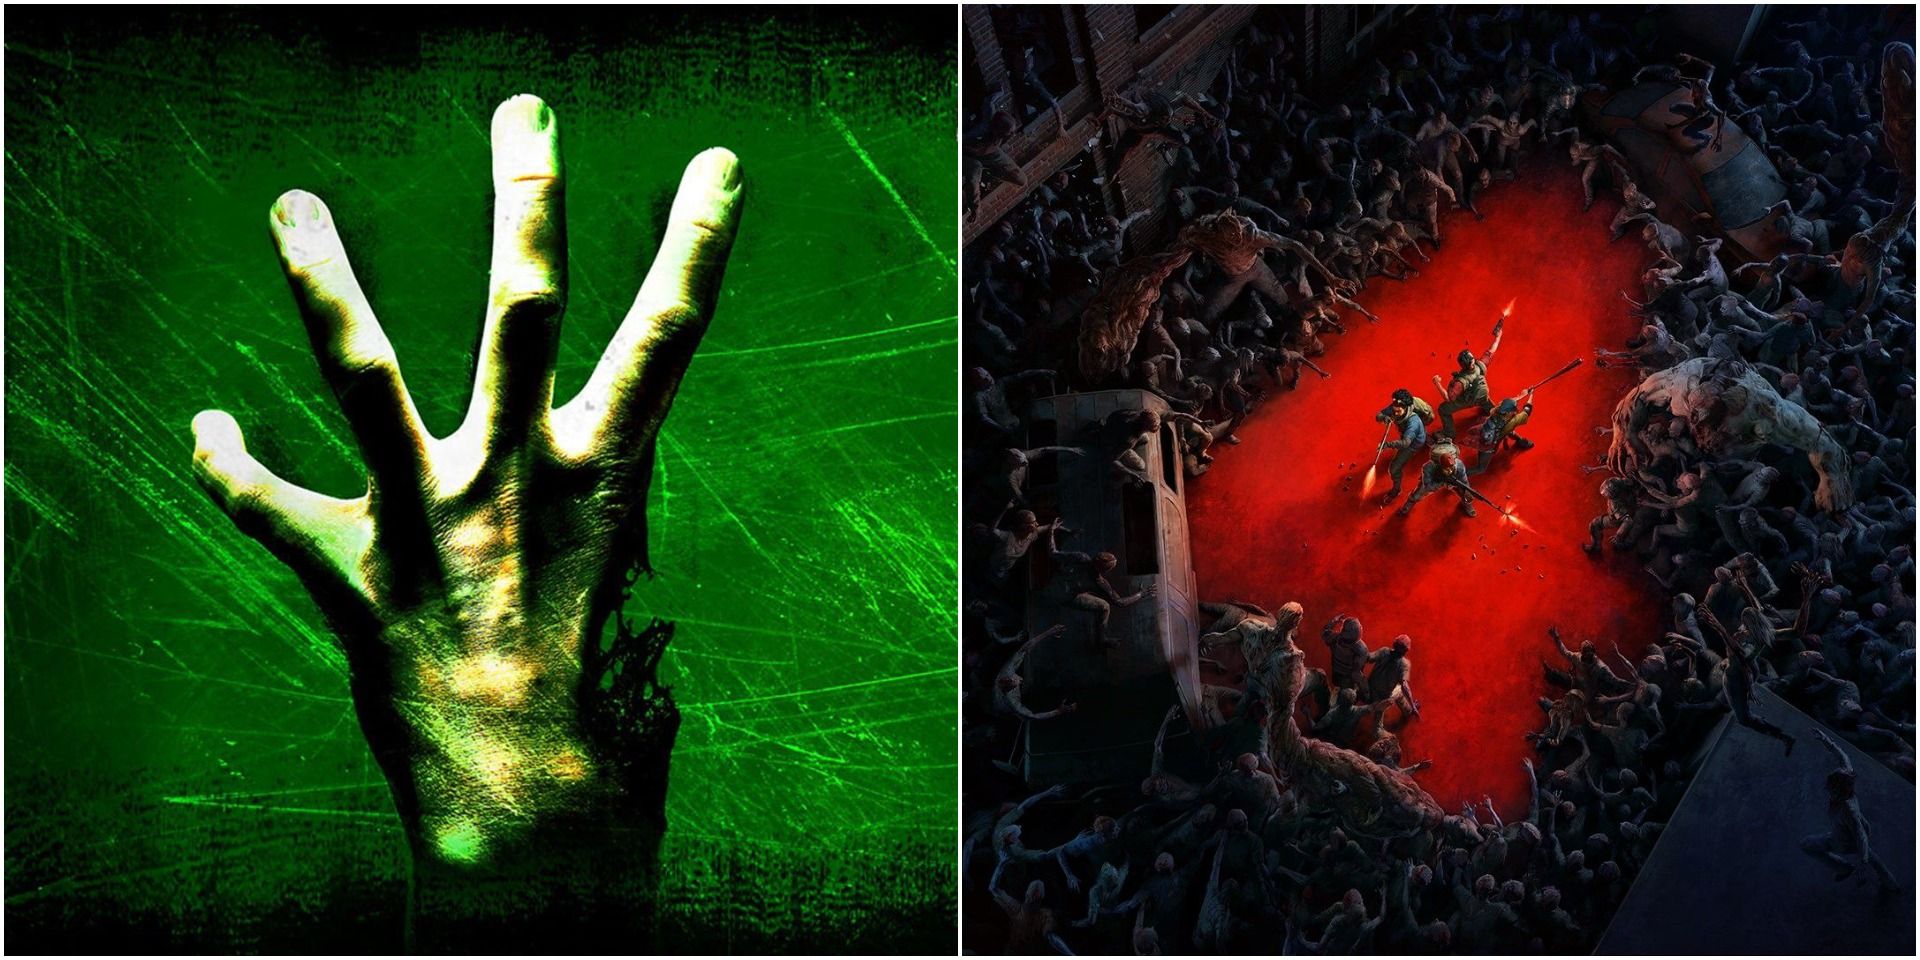 A collage showing cover art for Left 4 Dead and Back 4 Blood